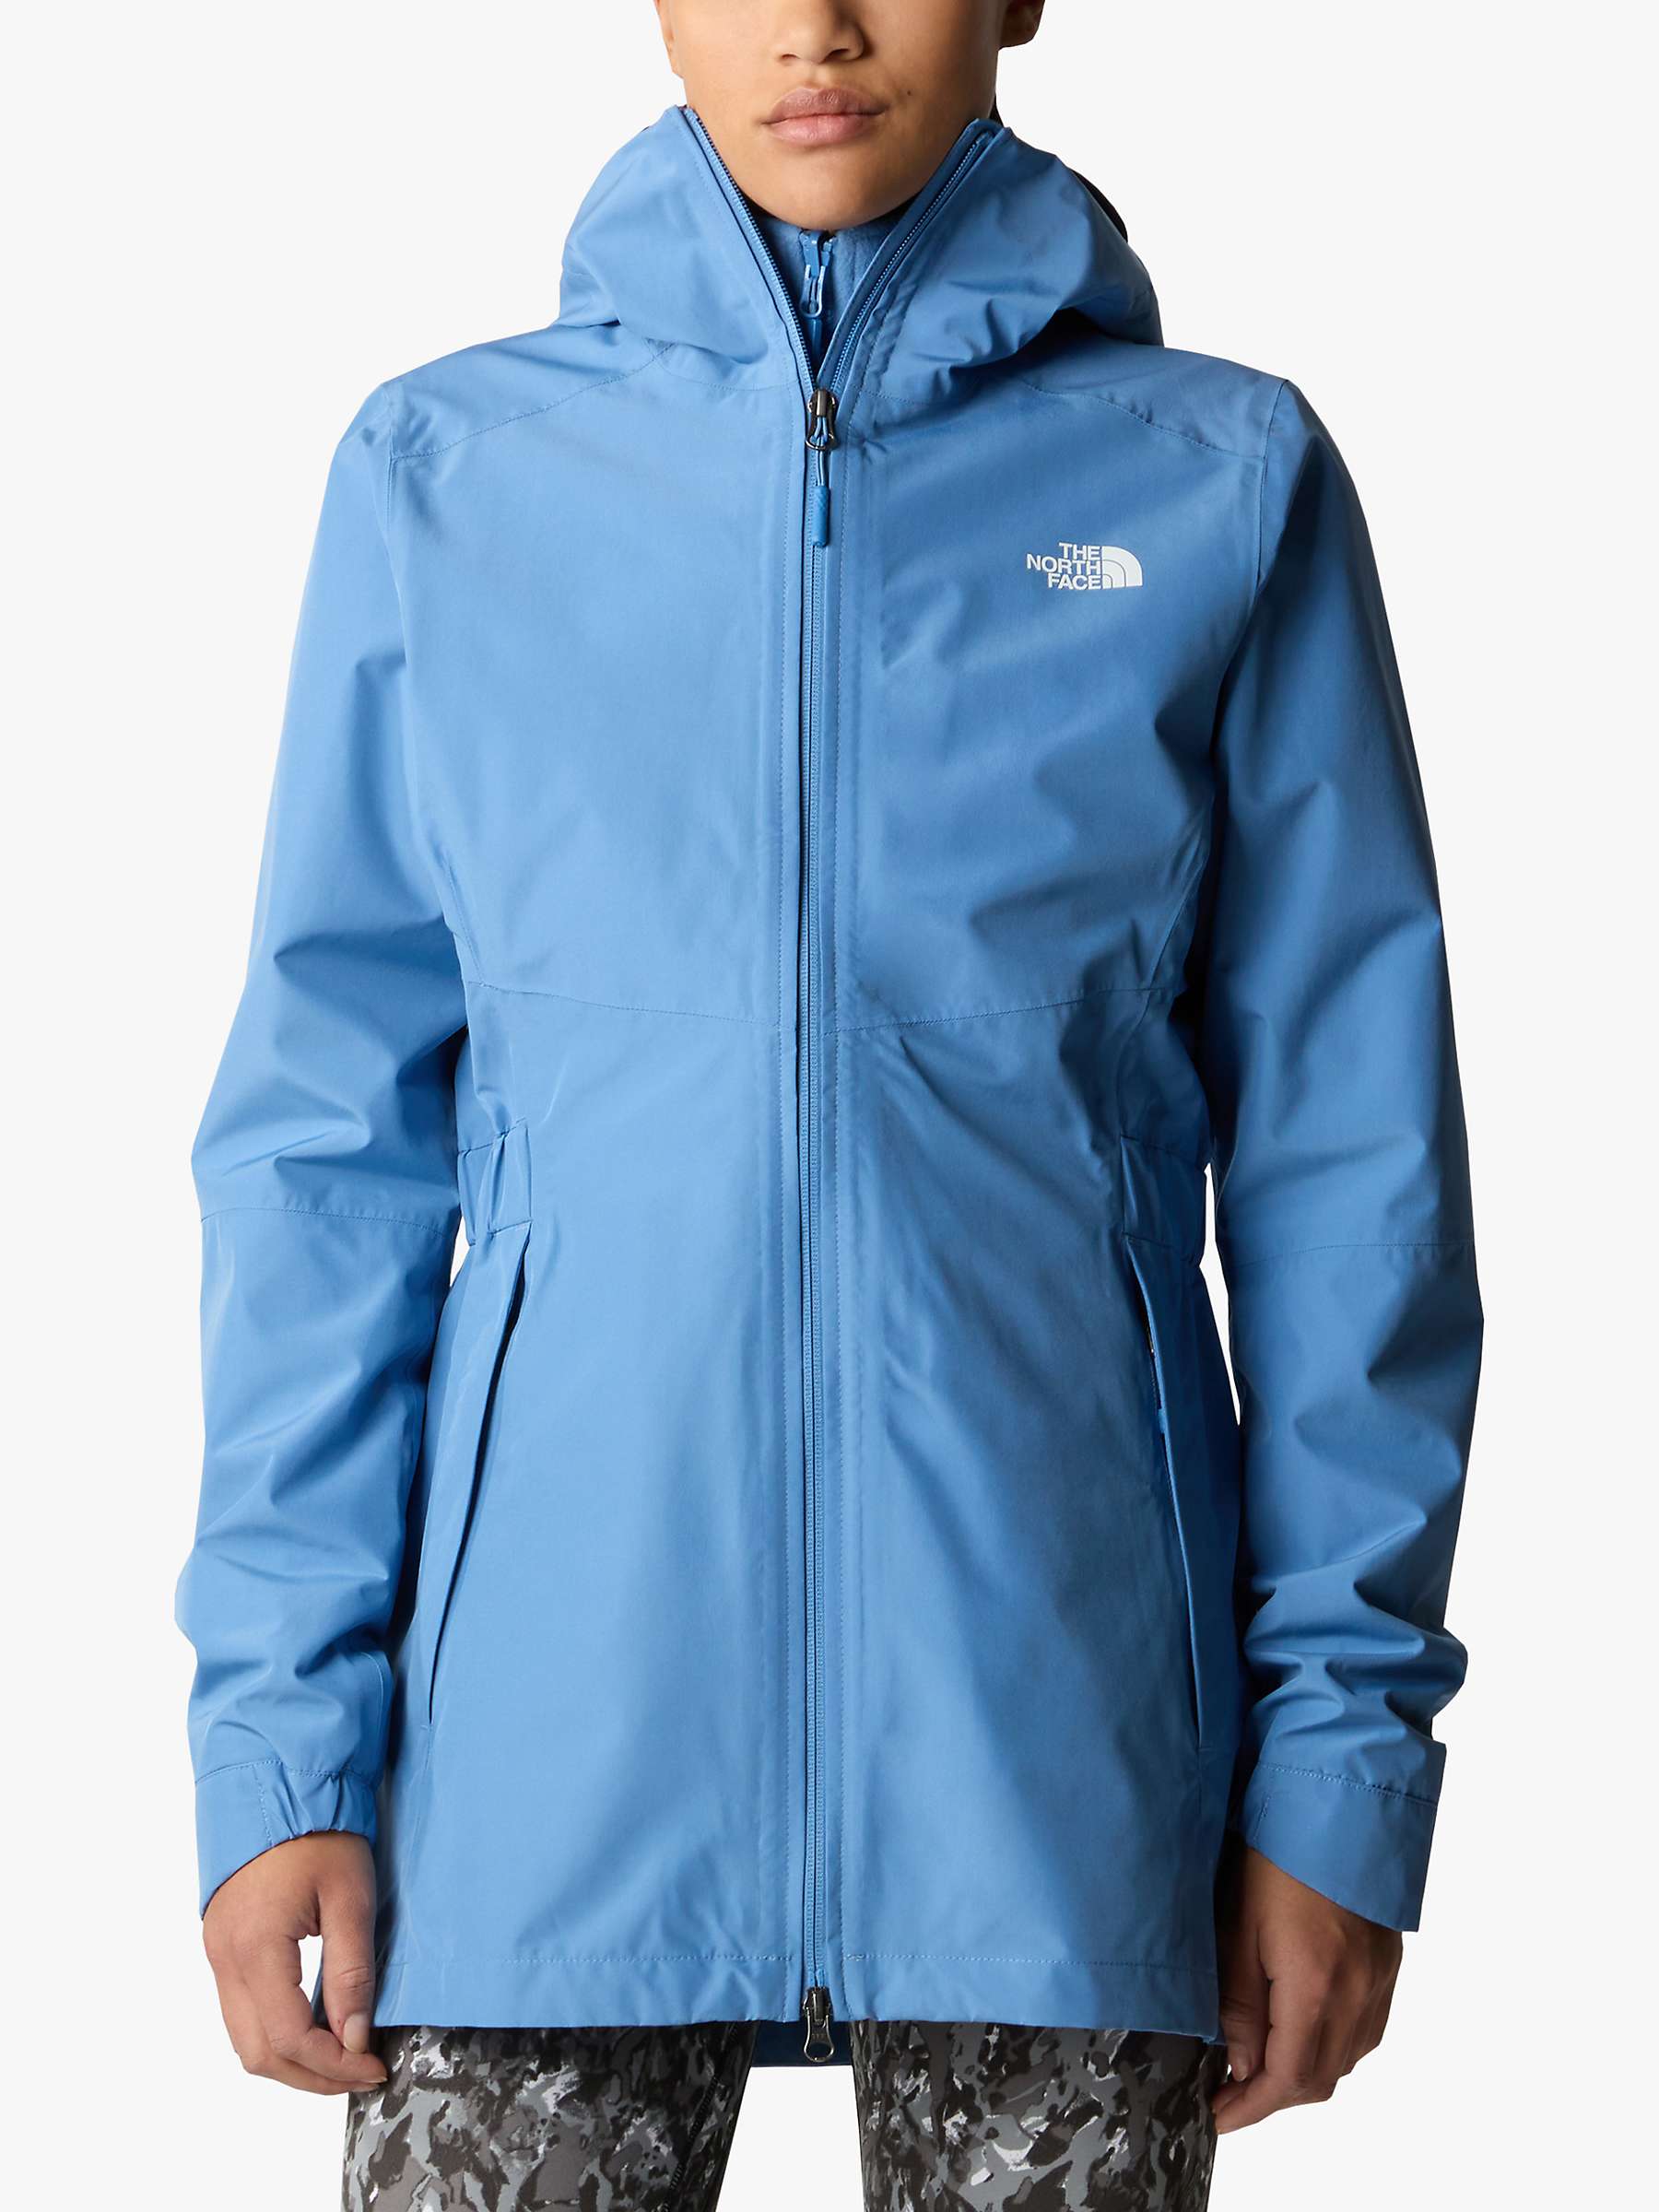 Buy The North Face Hikesteller Women's Waterproof Parka Shell Jacket Online at johnlewis.com